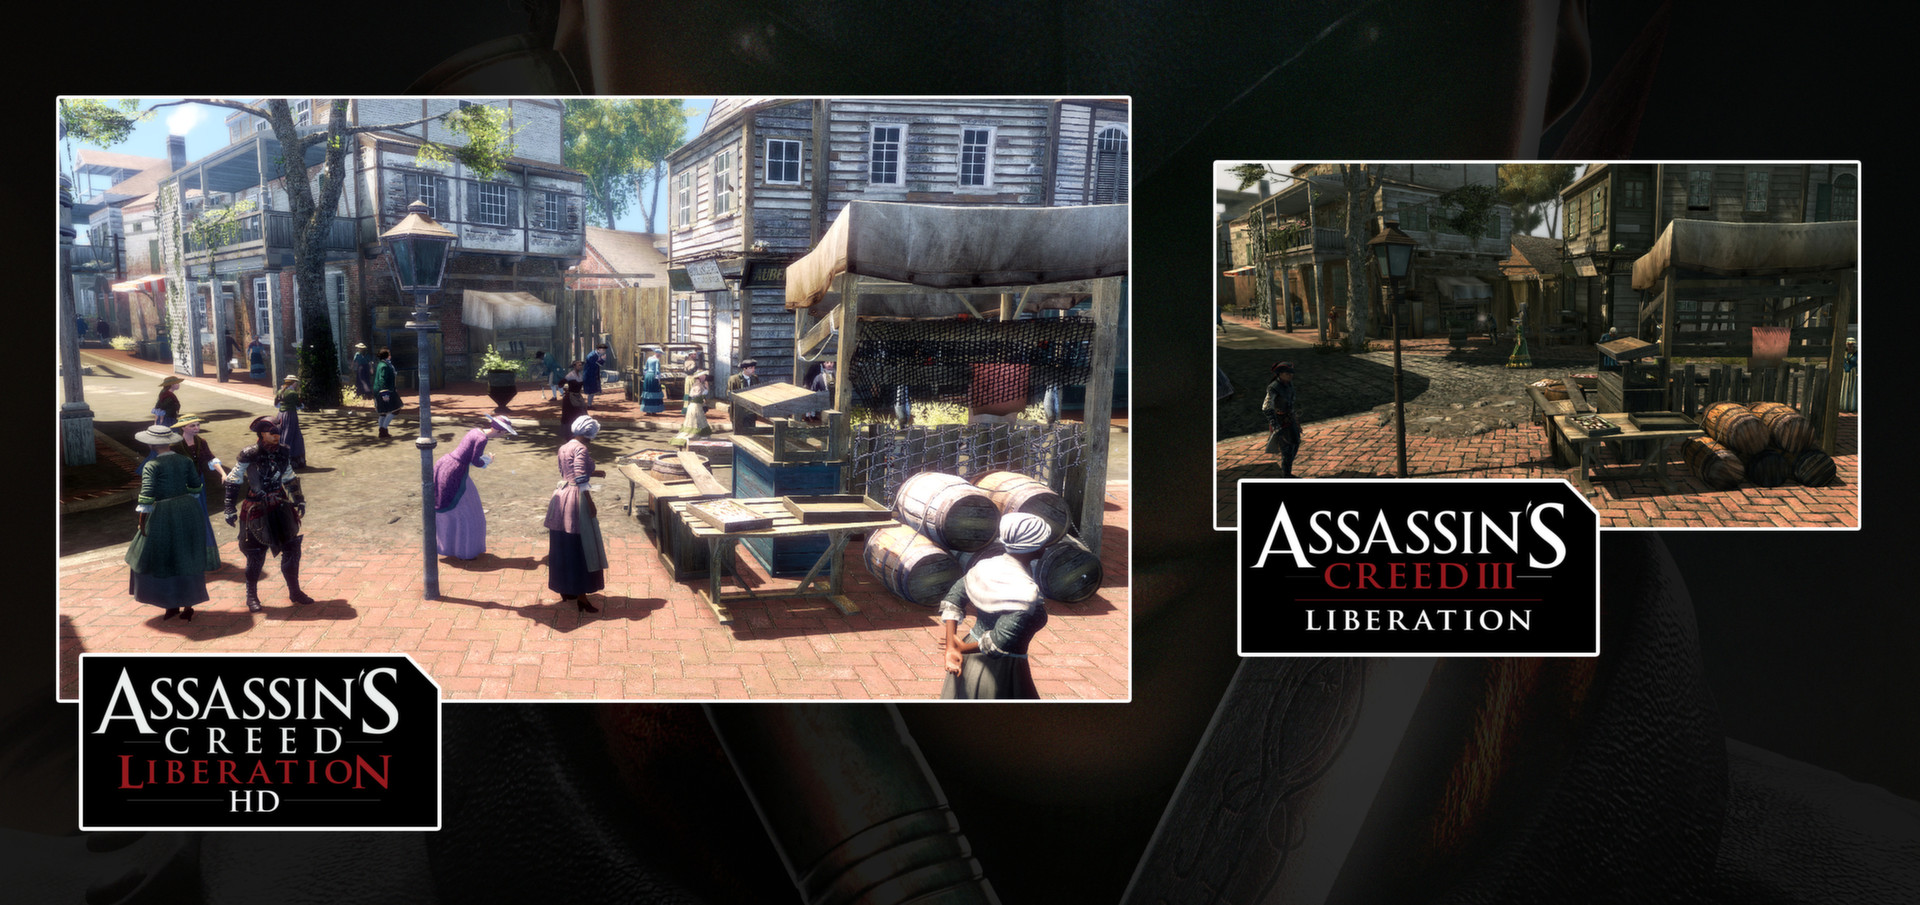 Assassin's Creed® Liberation HD on Steam